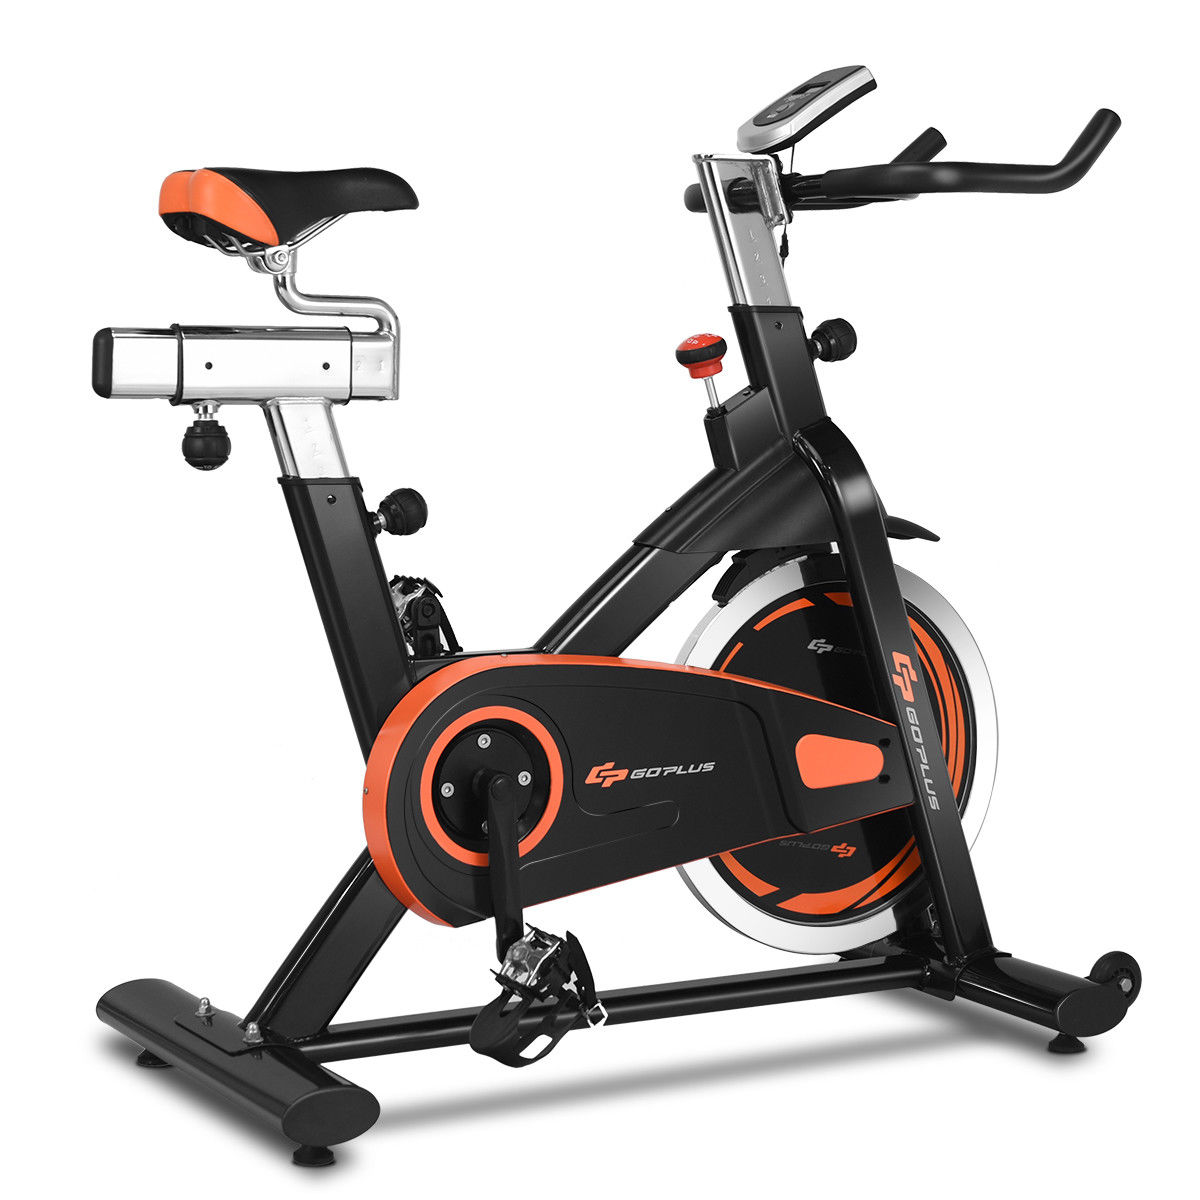 Goplus Exercise Bike Cycle Trainer Indoor Workout Cardio Fitness Bicycle Stationary - image 1 of 10